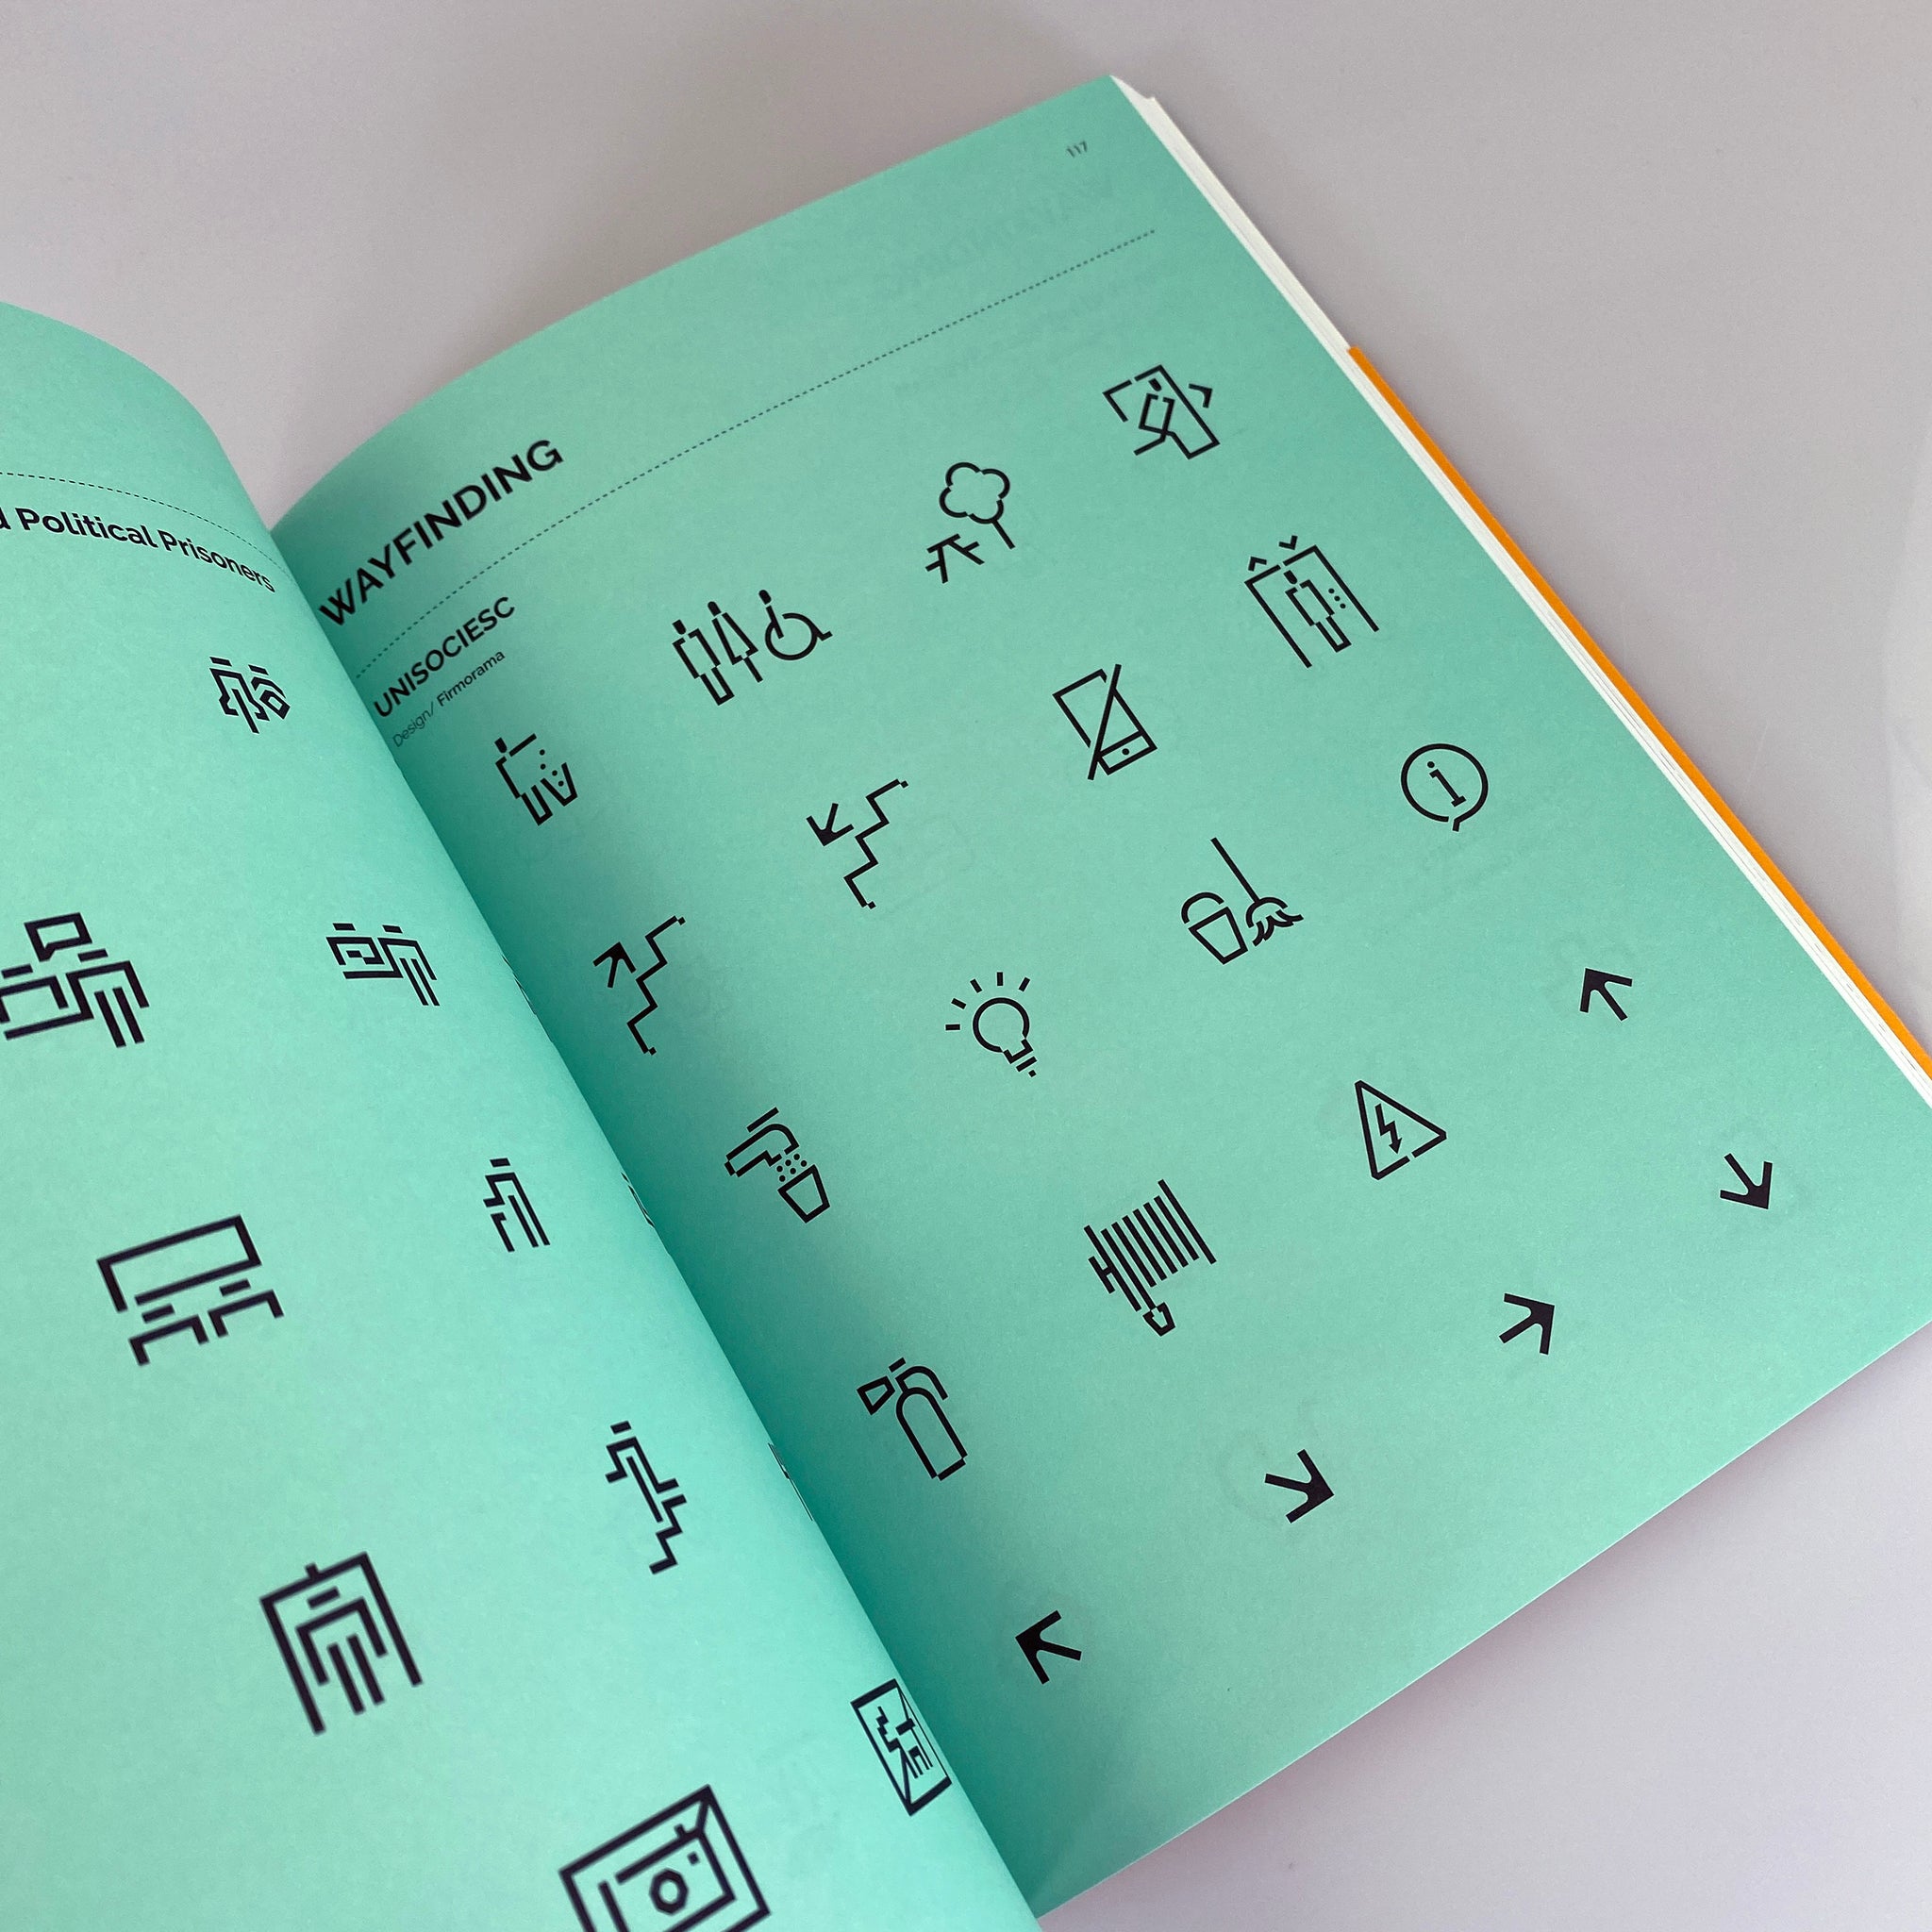 Iconism: Designing Modern Icons and Pictograms